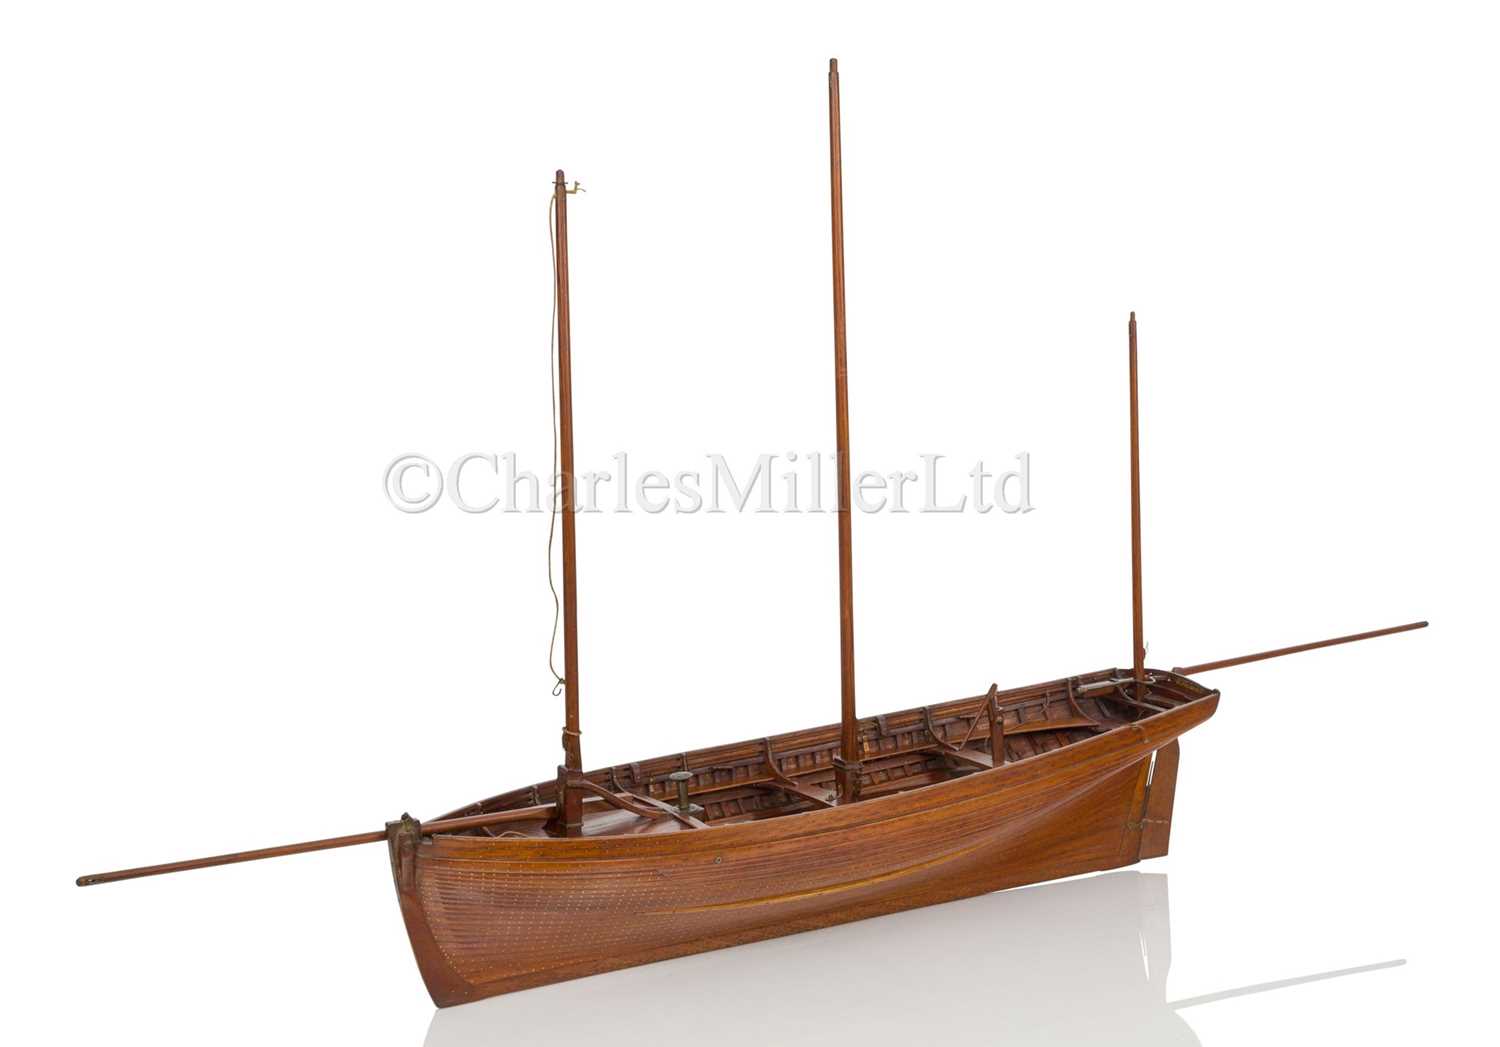 Lot 11 - AN HISTORICALLY INTERESTING MODEL OF THE RAMSGATE HOVELLERS' LUGGER PRINCE OF WALES, BUILT BY H. TWYMAN AND DISPLAYED AT THE GREAT EXHIBITION, LONDON, 1851